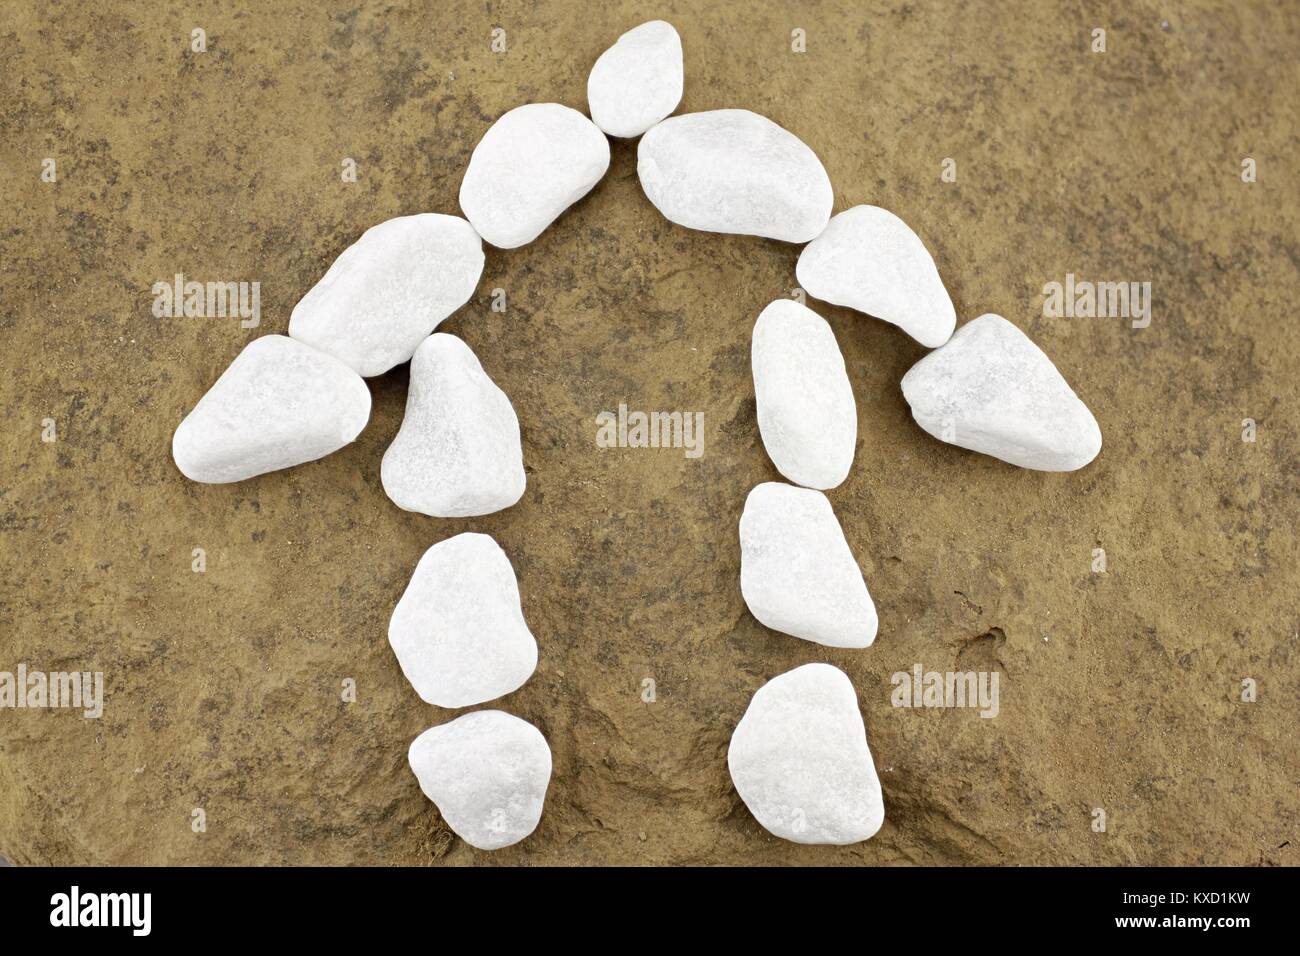 Small house of white pebbles in front of brown stone Stock Photo